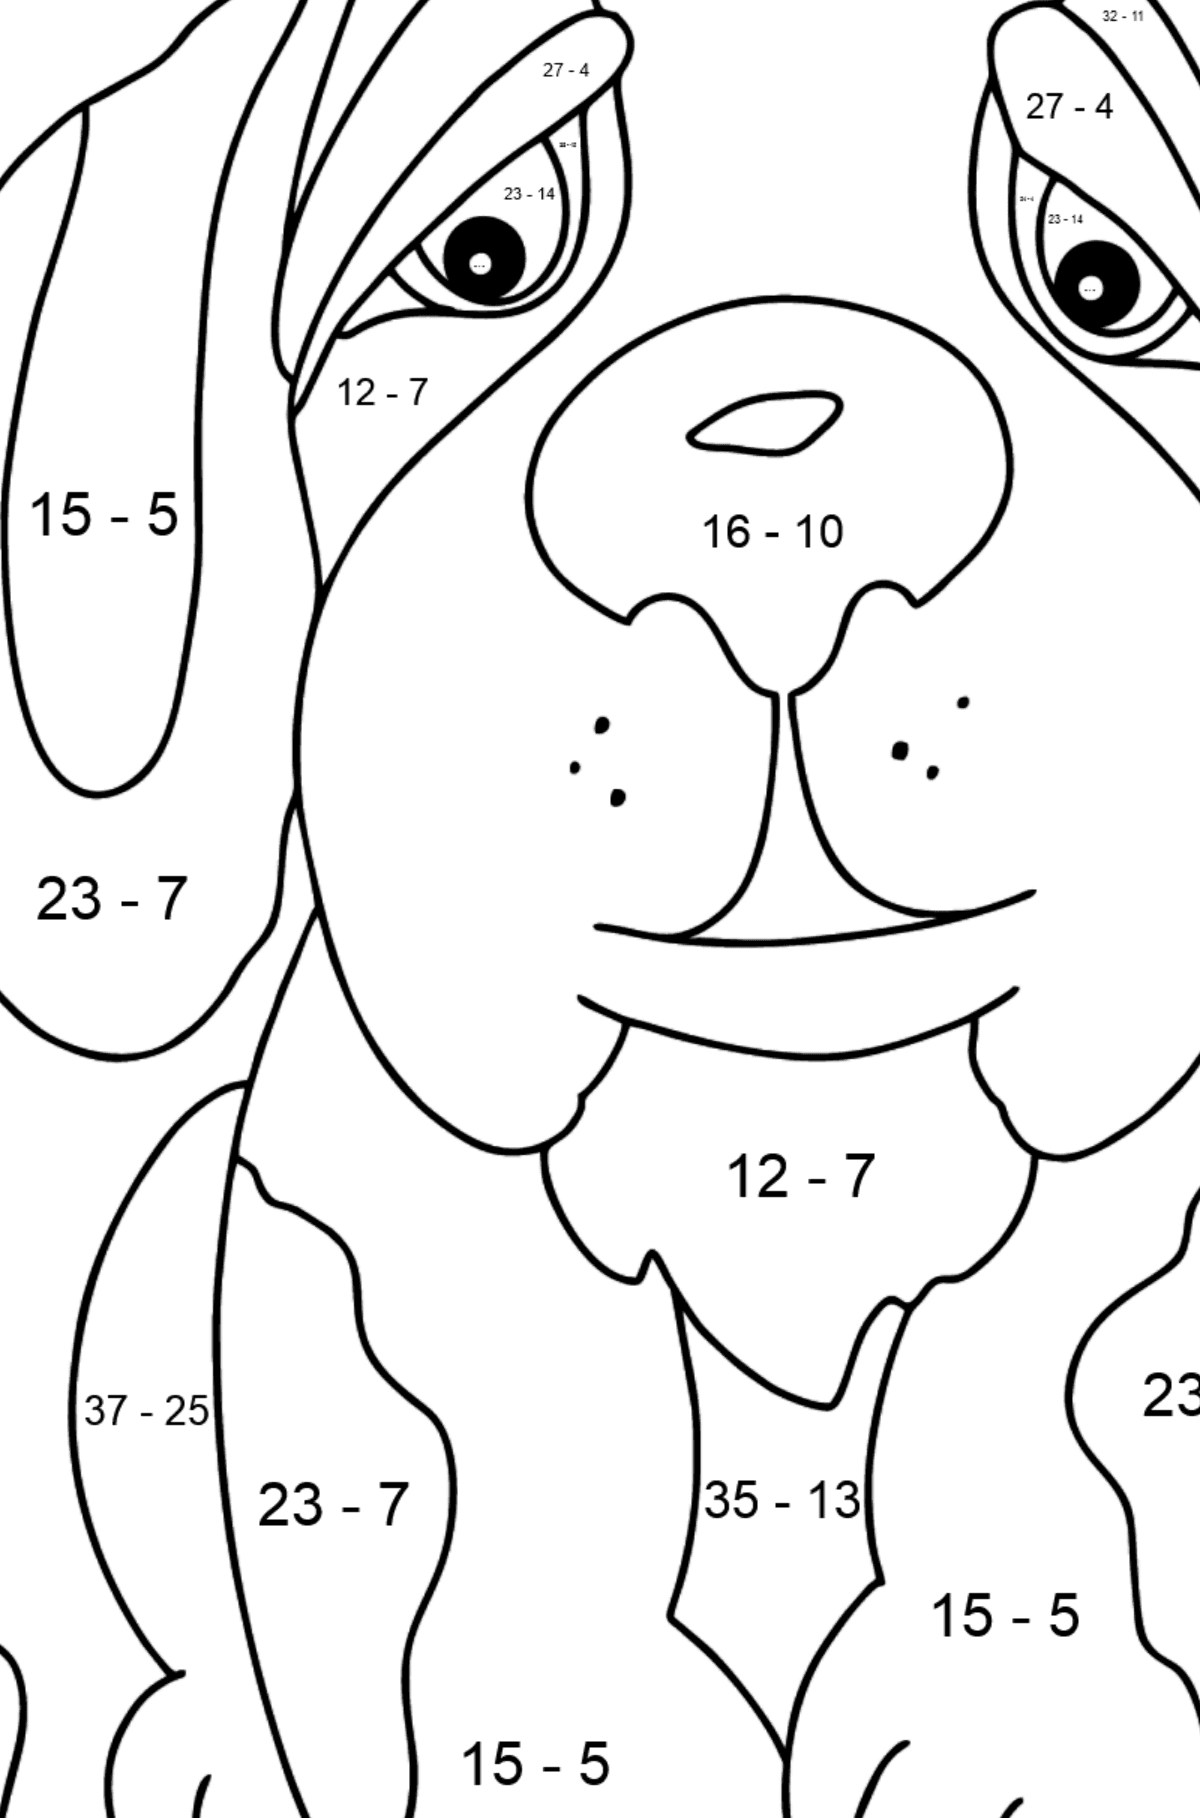 Coloring Page - A Dog is Watching a Butterfly - Math Coloring - Subtraction for Kids